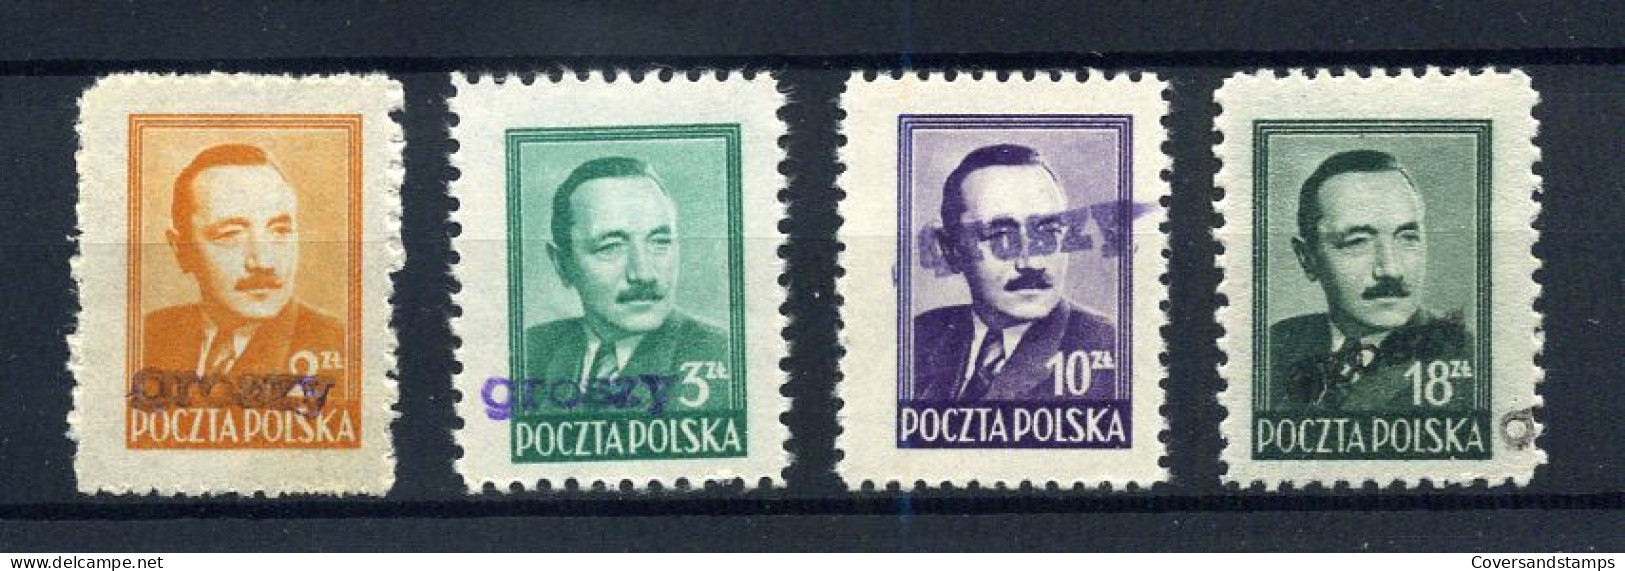 Poland - Surcharge 'Groszy" - ** MNH - Unused Stamps